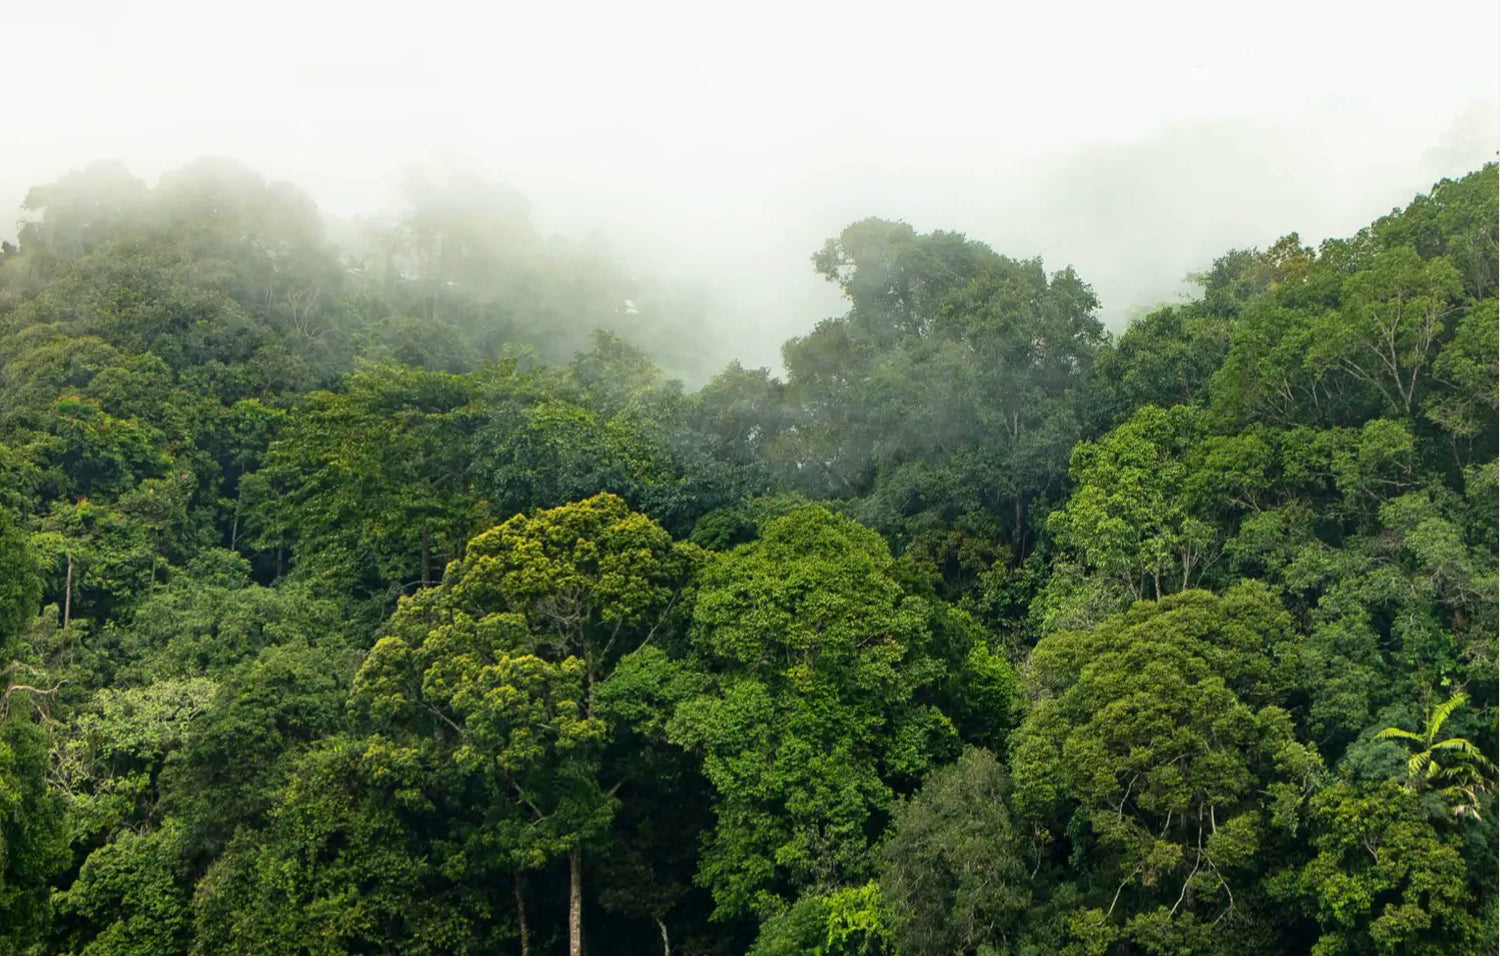 Lush green trees in a forest with fog hanging over them 